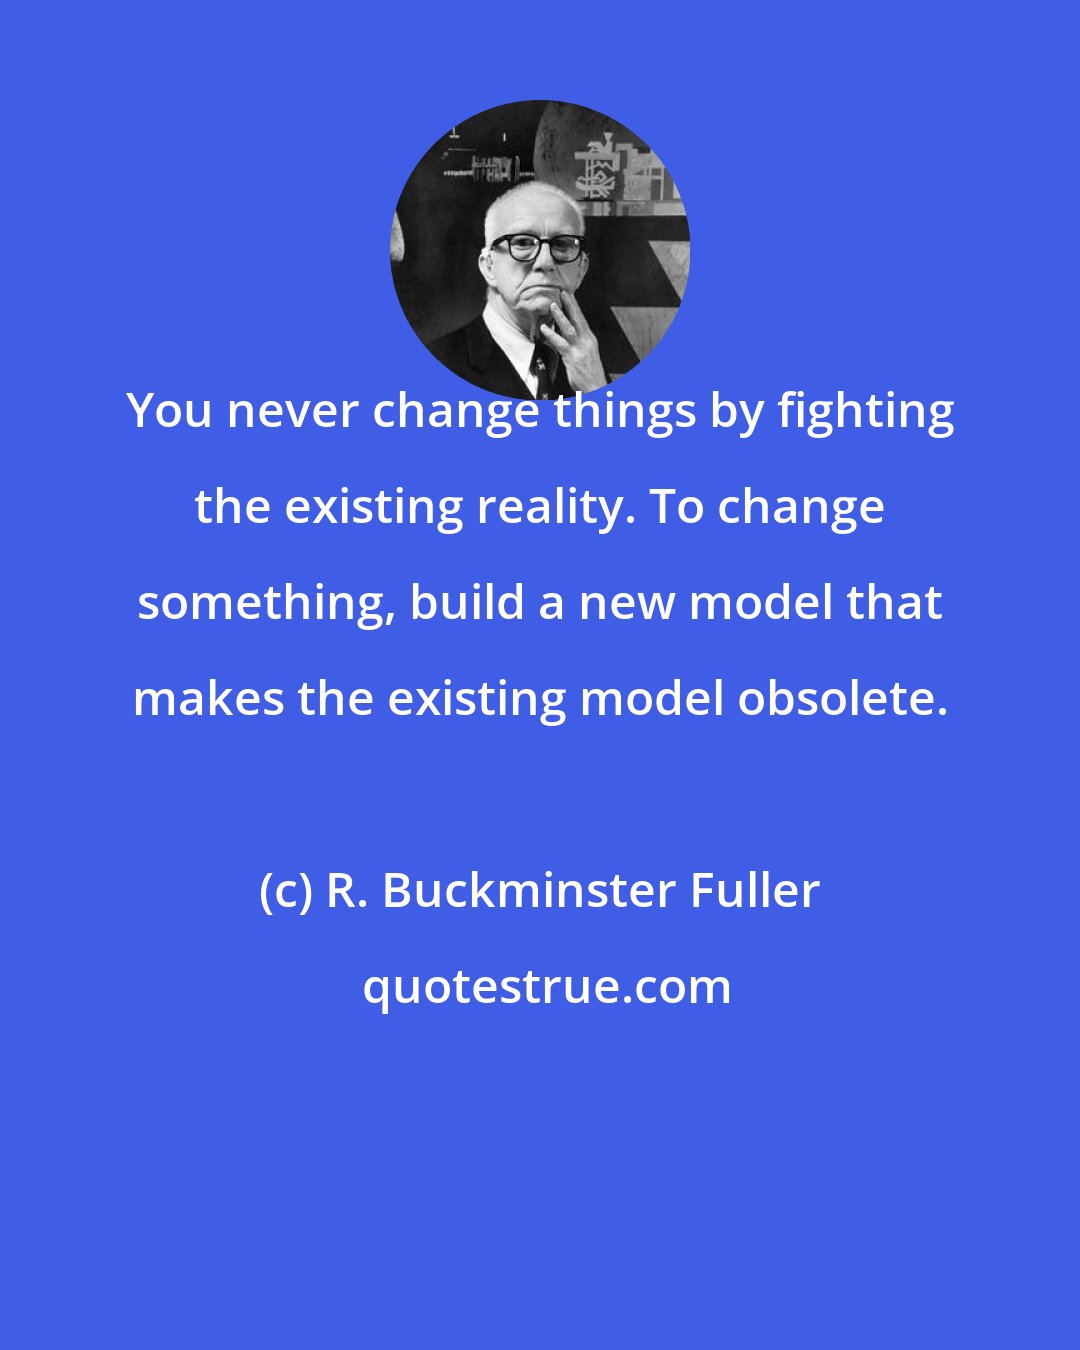 R. Buckminster Fuller: You never change things by fighting the existing reality. To change something, build a new model that makes the existing model obsolete.